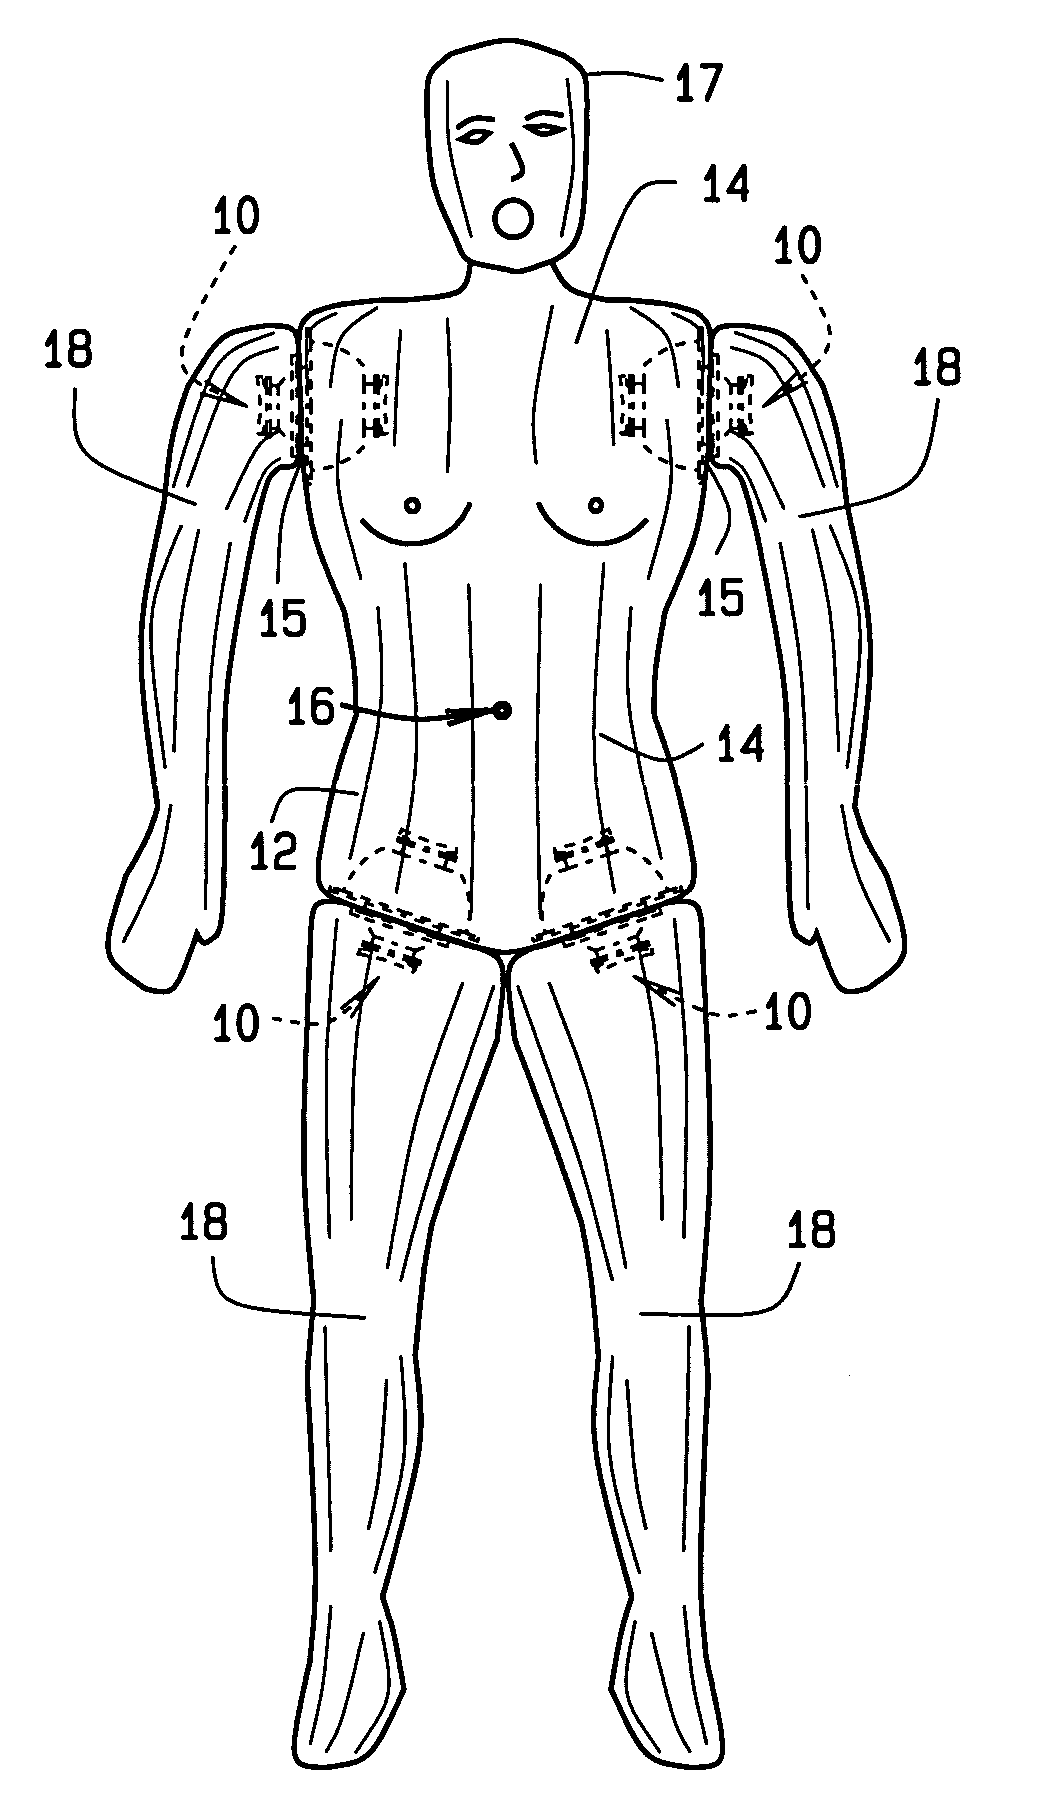 Swivel air passing joint for an inflatable mannequin